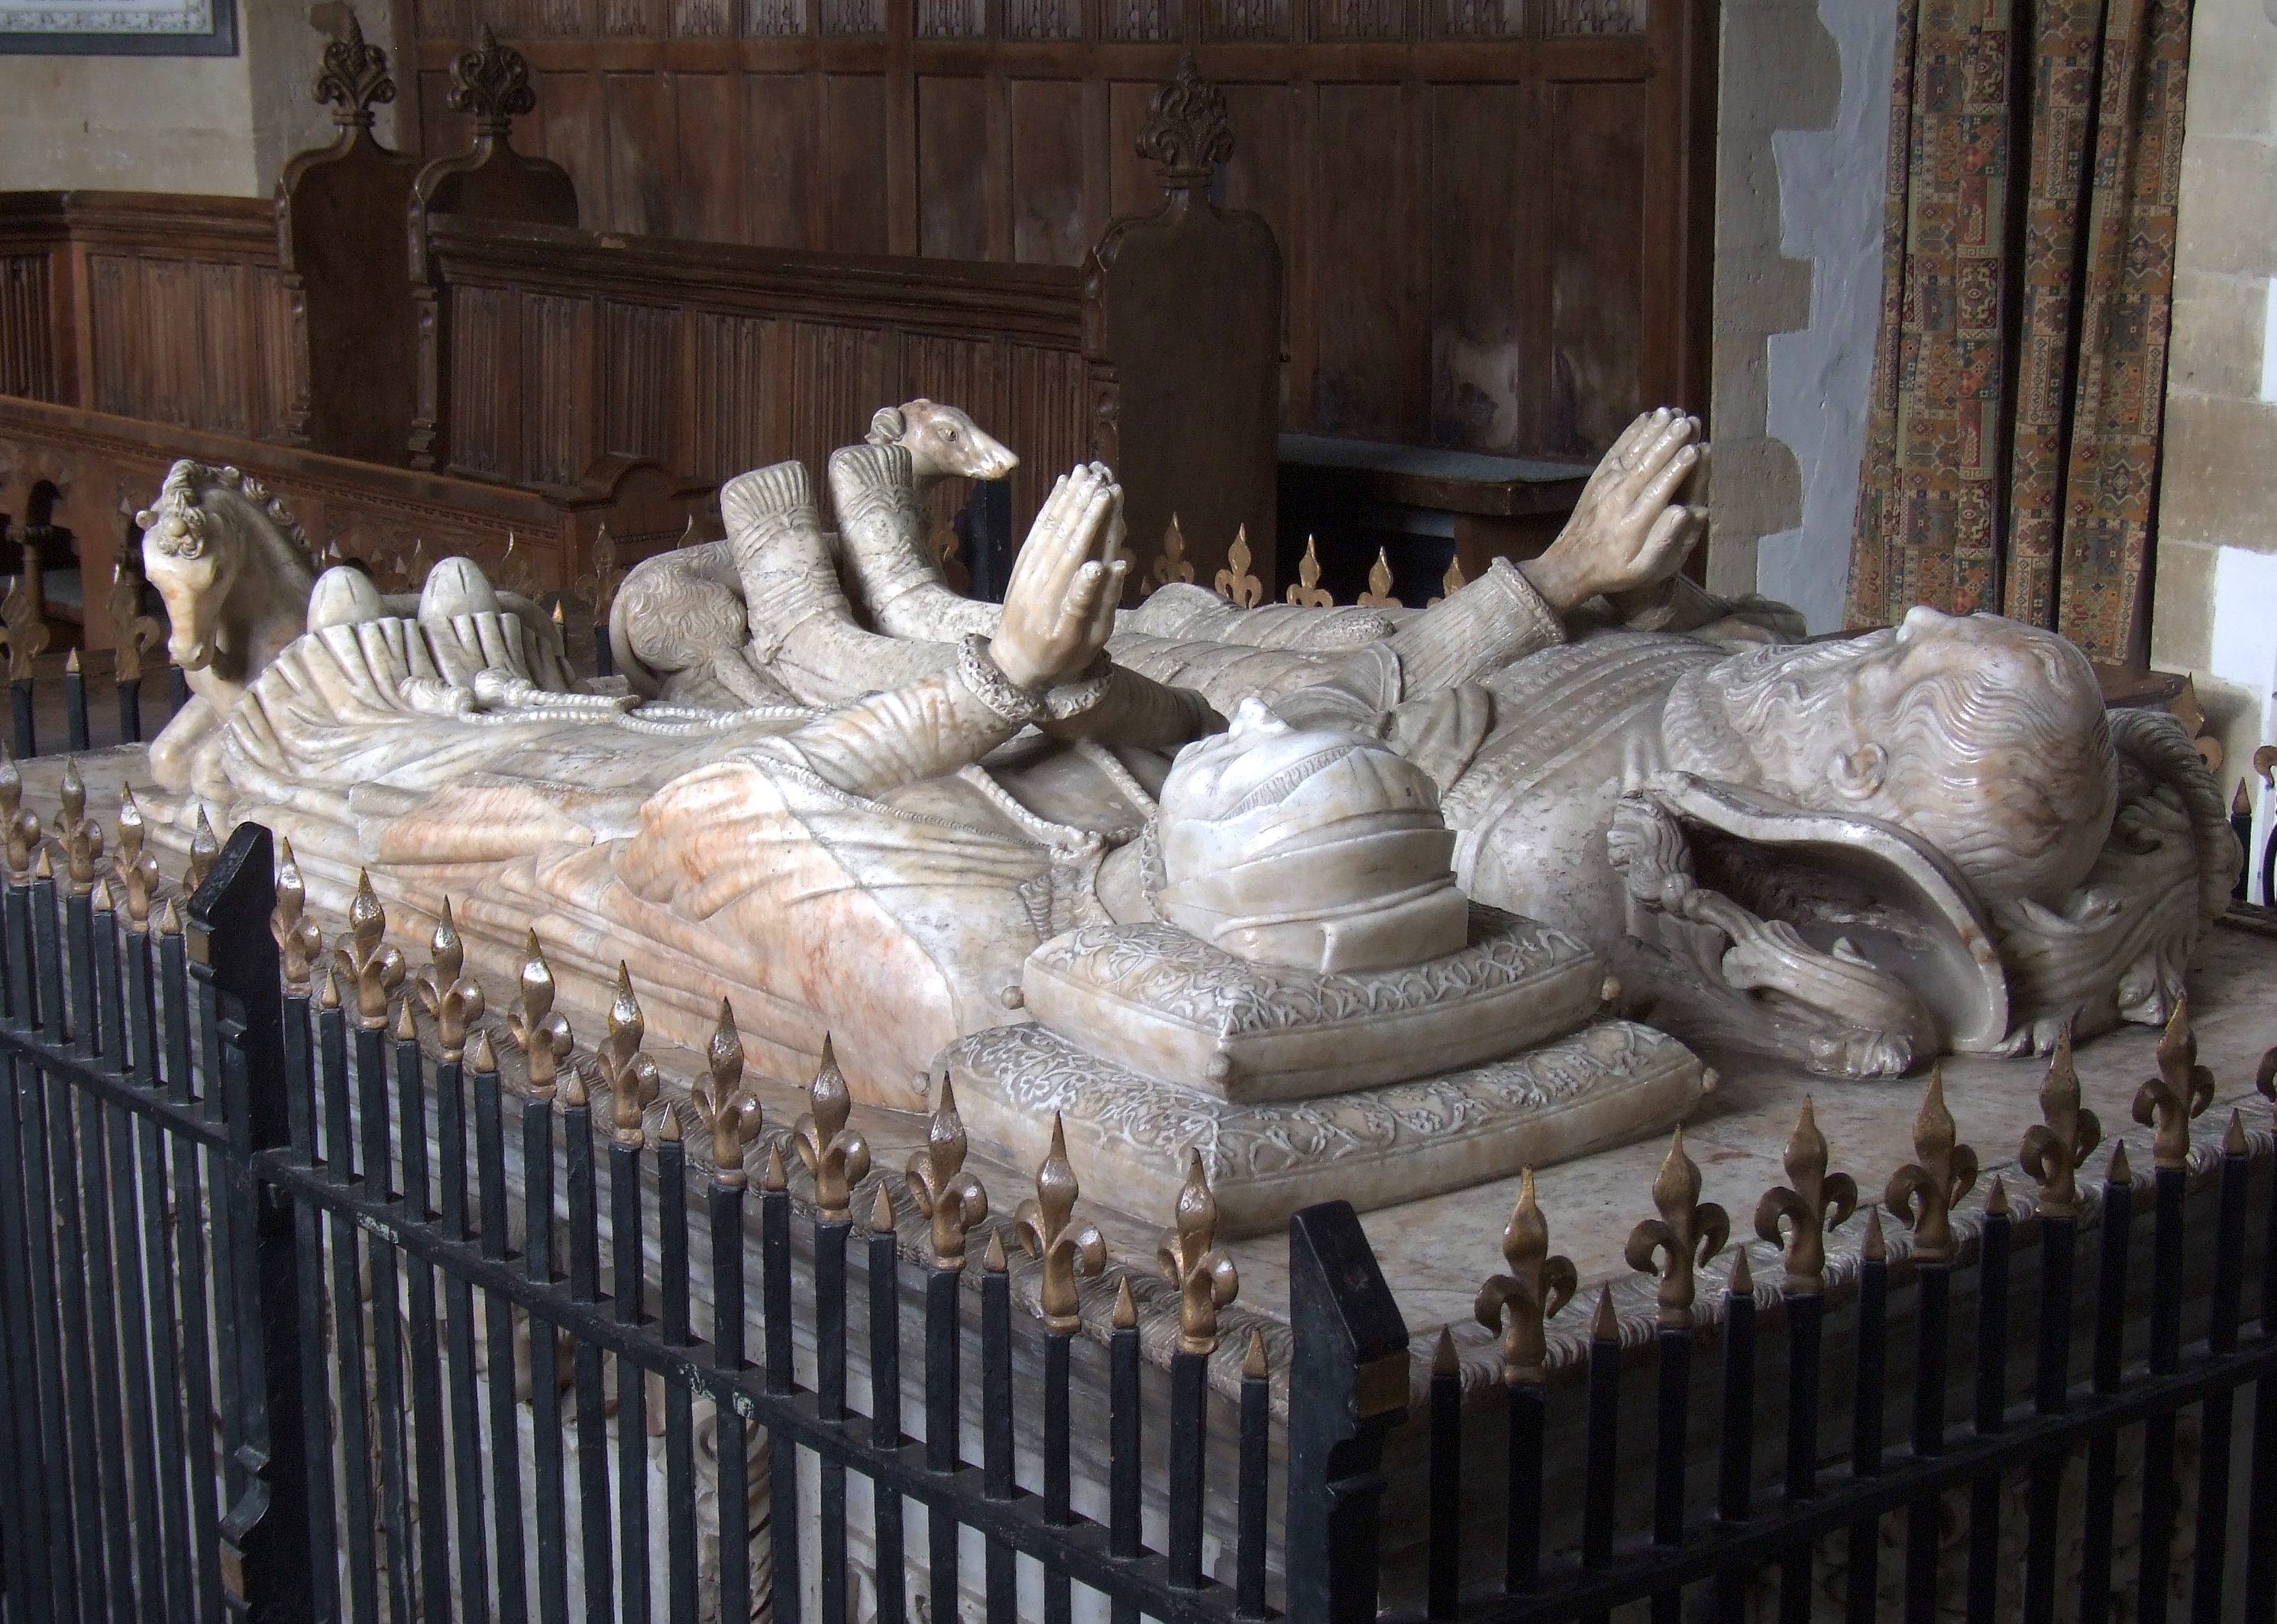 1559 - The tomb of Lord Williams of Thame (died 1559) and his wife